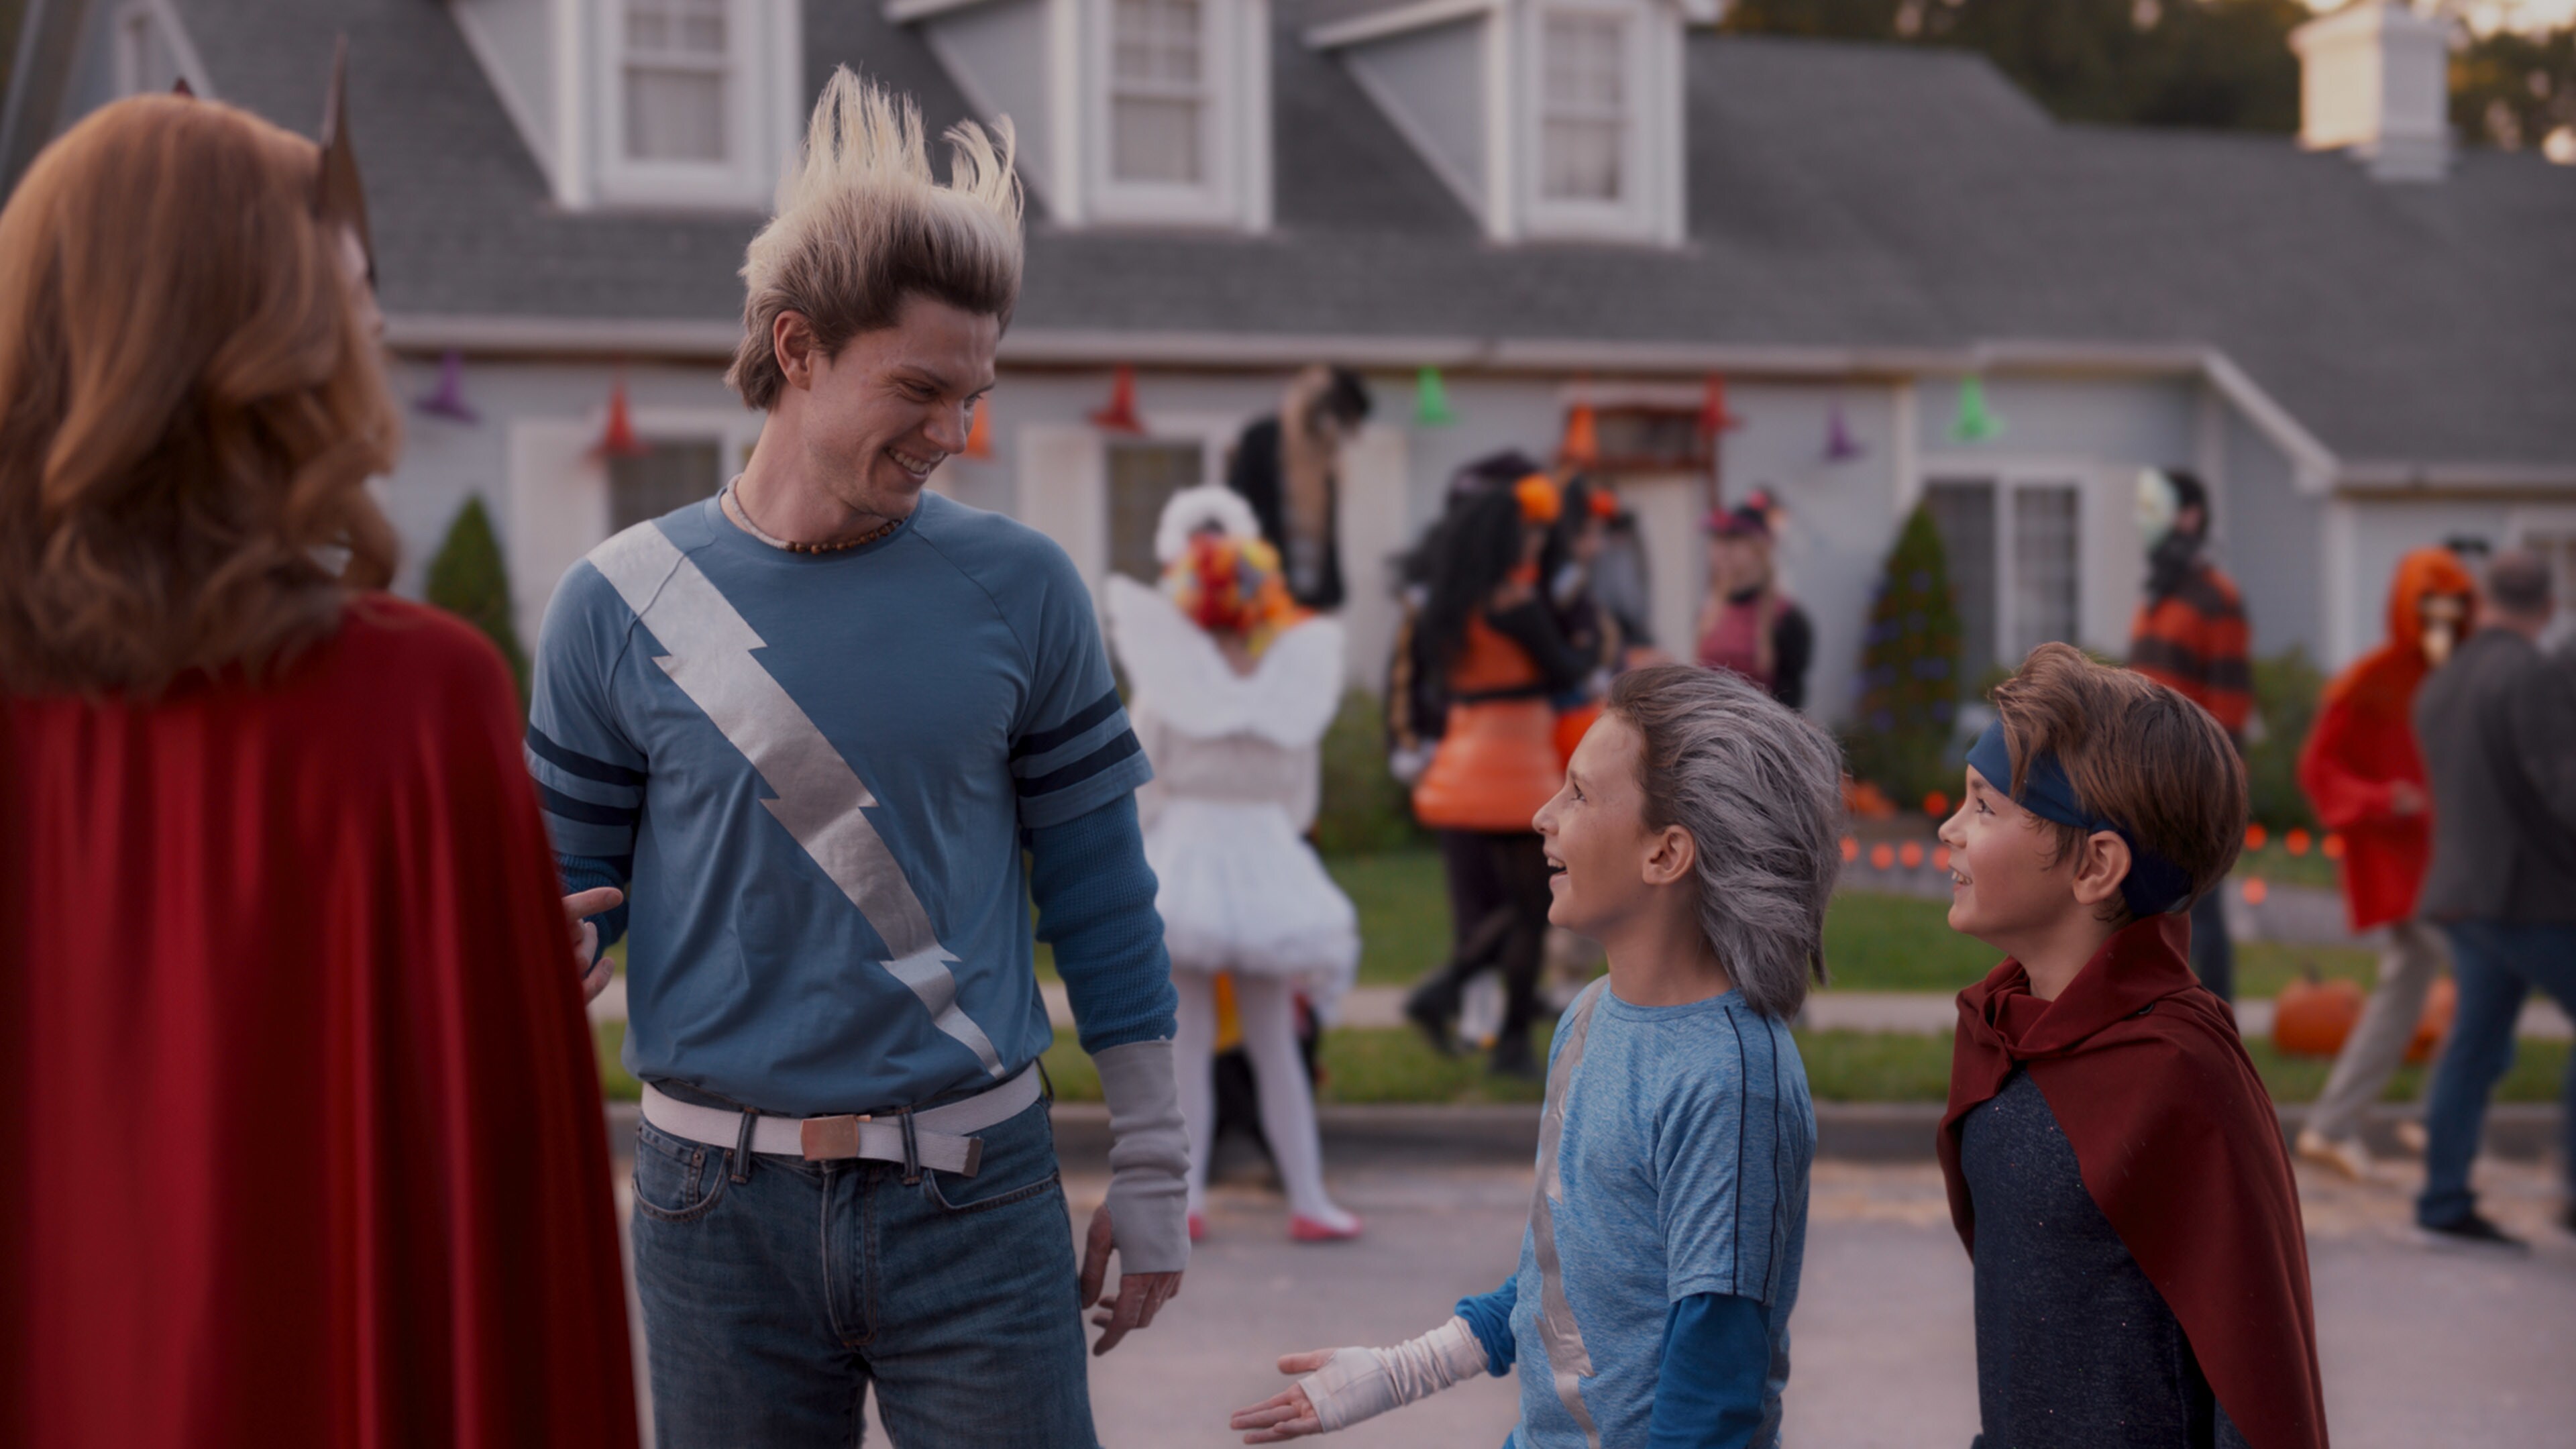 (L-R): Elizabeth Olsen as Wanda Maximoff, Evan Peters as Pietro, Jett Klyne as Tommy and Julian Hilliard as Billy in Marvel Studios' WANDAVISION exclusively on Disney+. Photo courtesy of Marvel Studios. ©Marvel Studios 2021. All Rights Reserved.